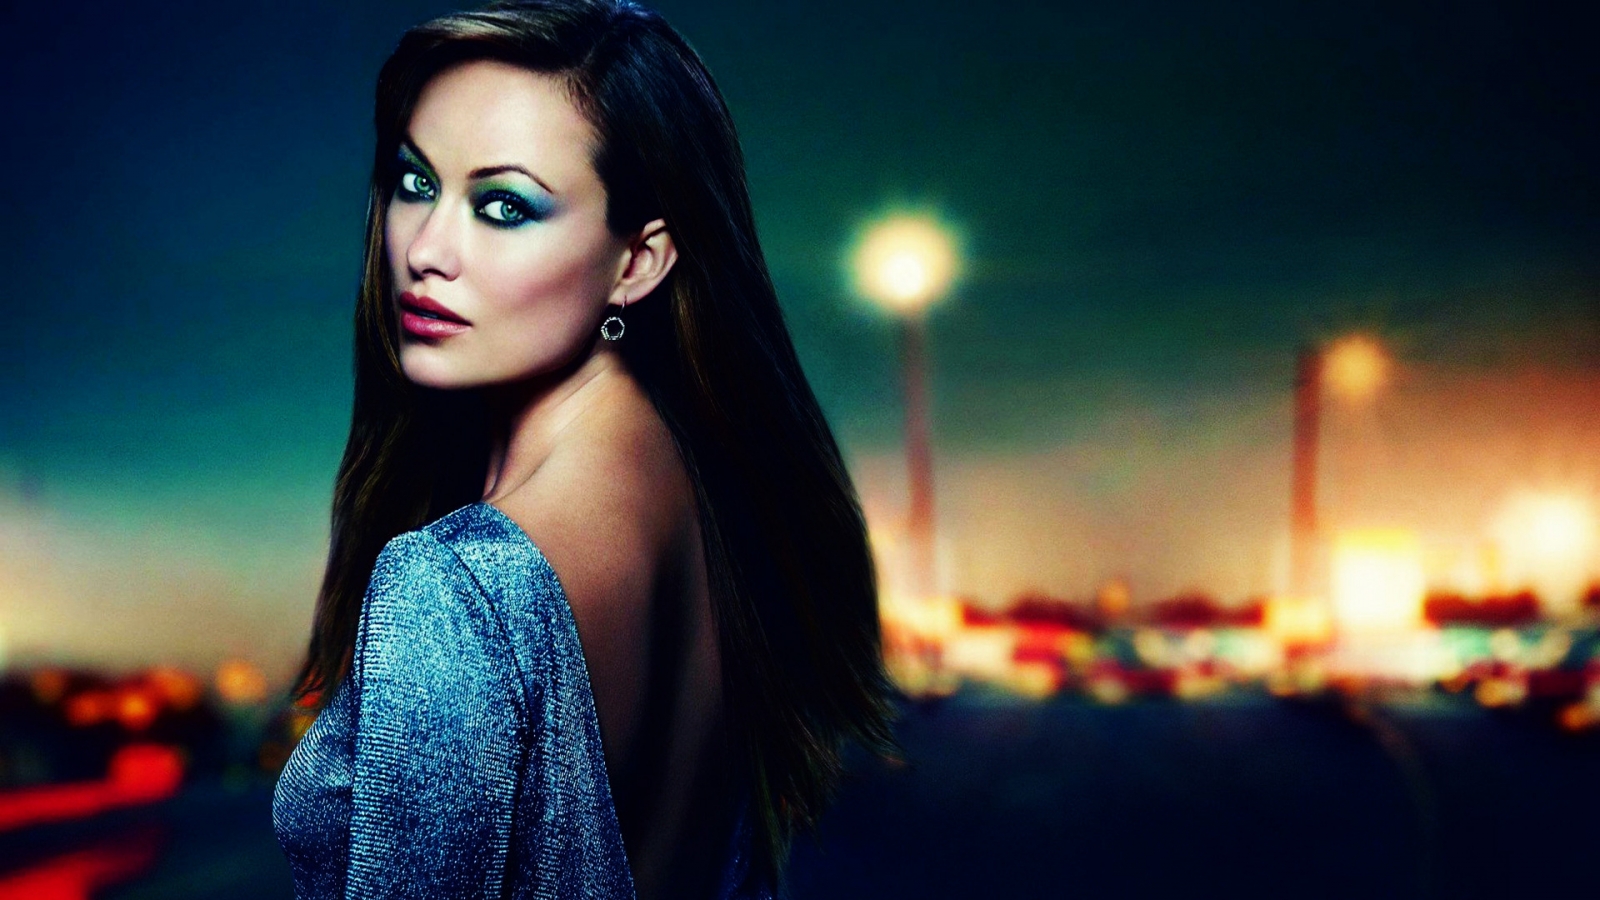 Olivia Wilde Profile Look for 1600 x 900 HDTV resolution